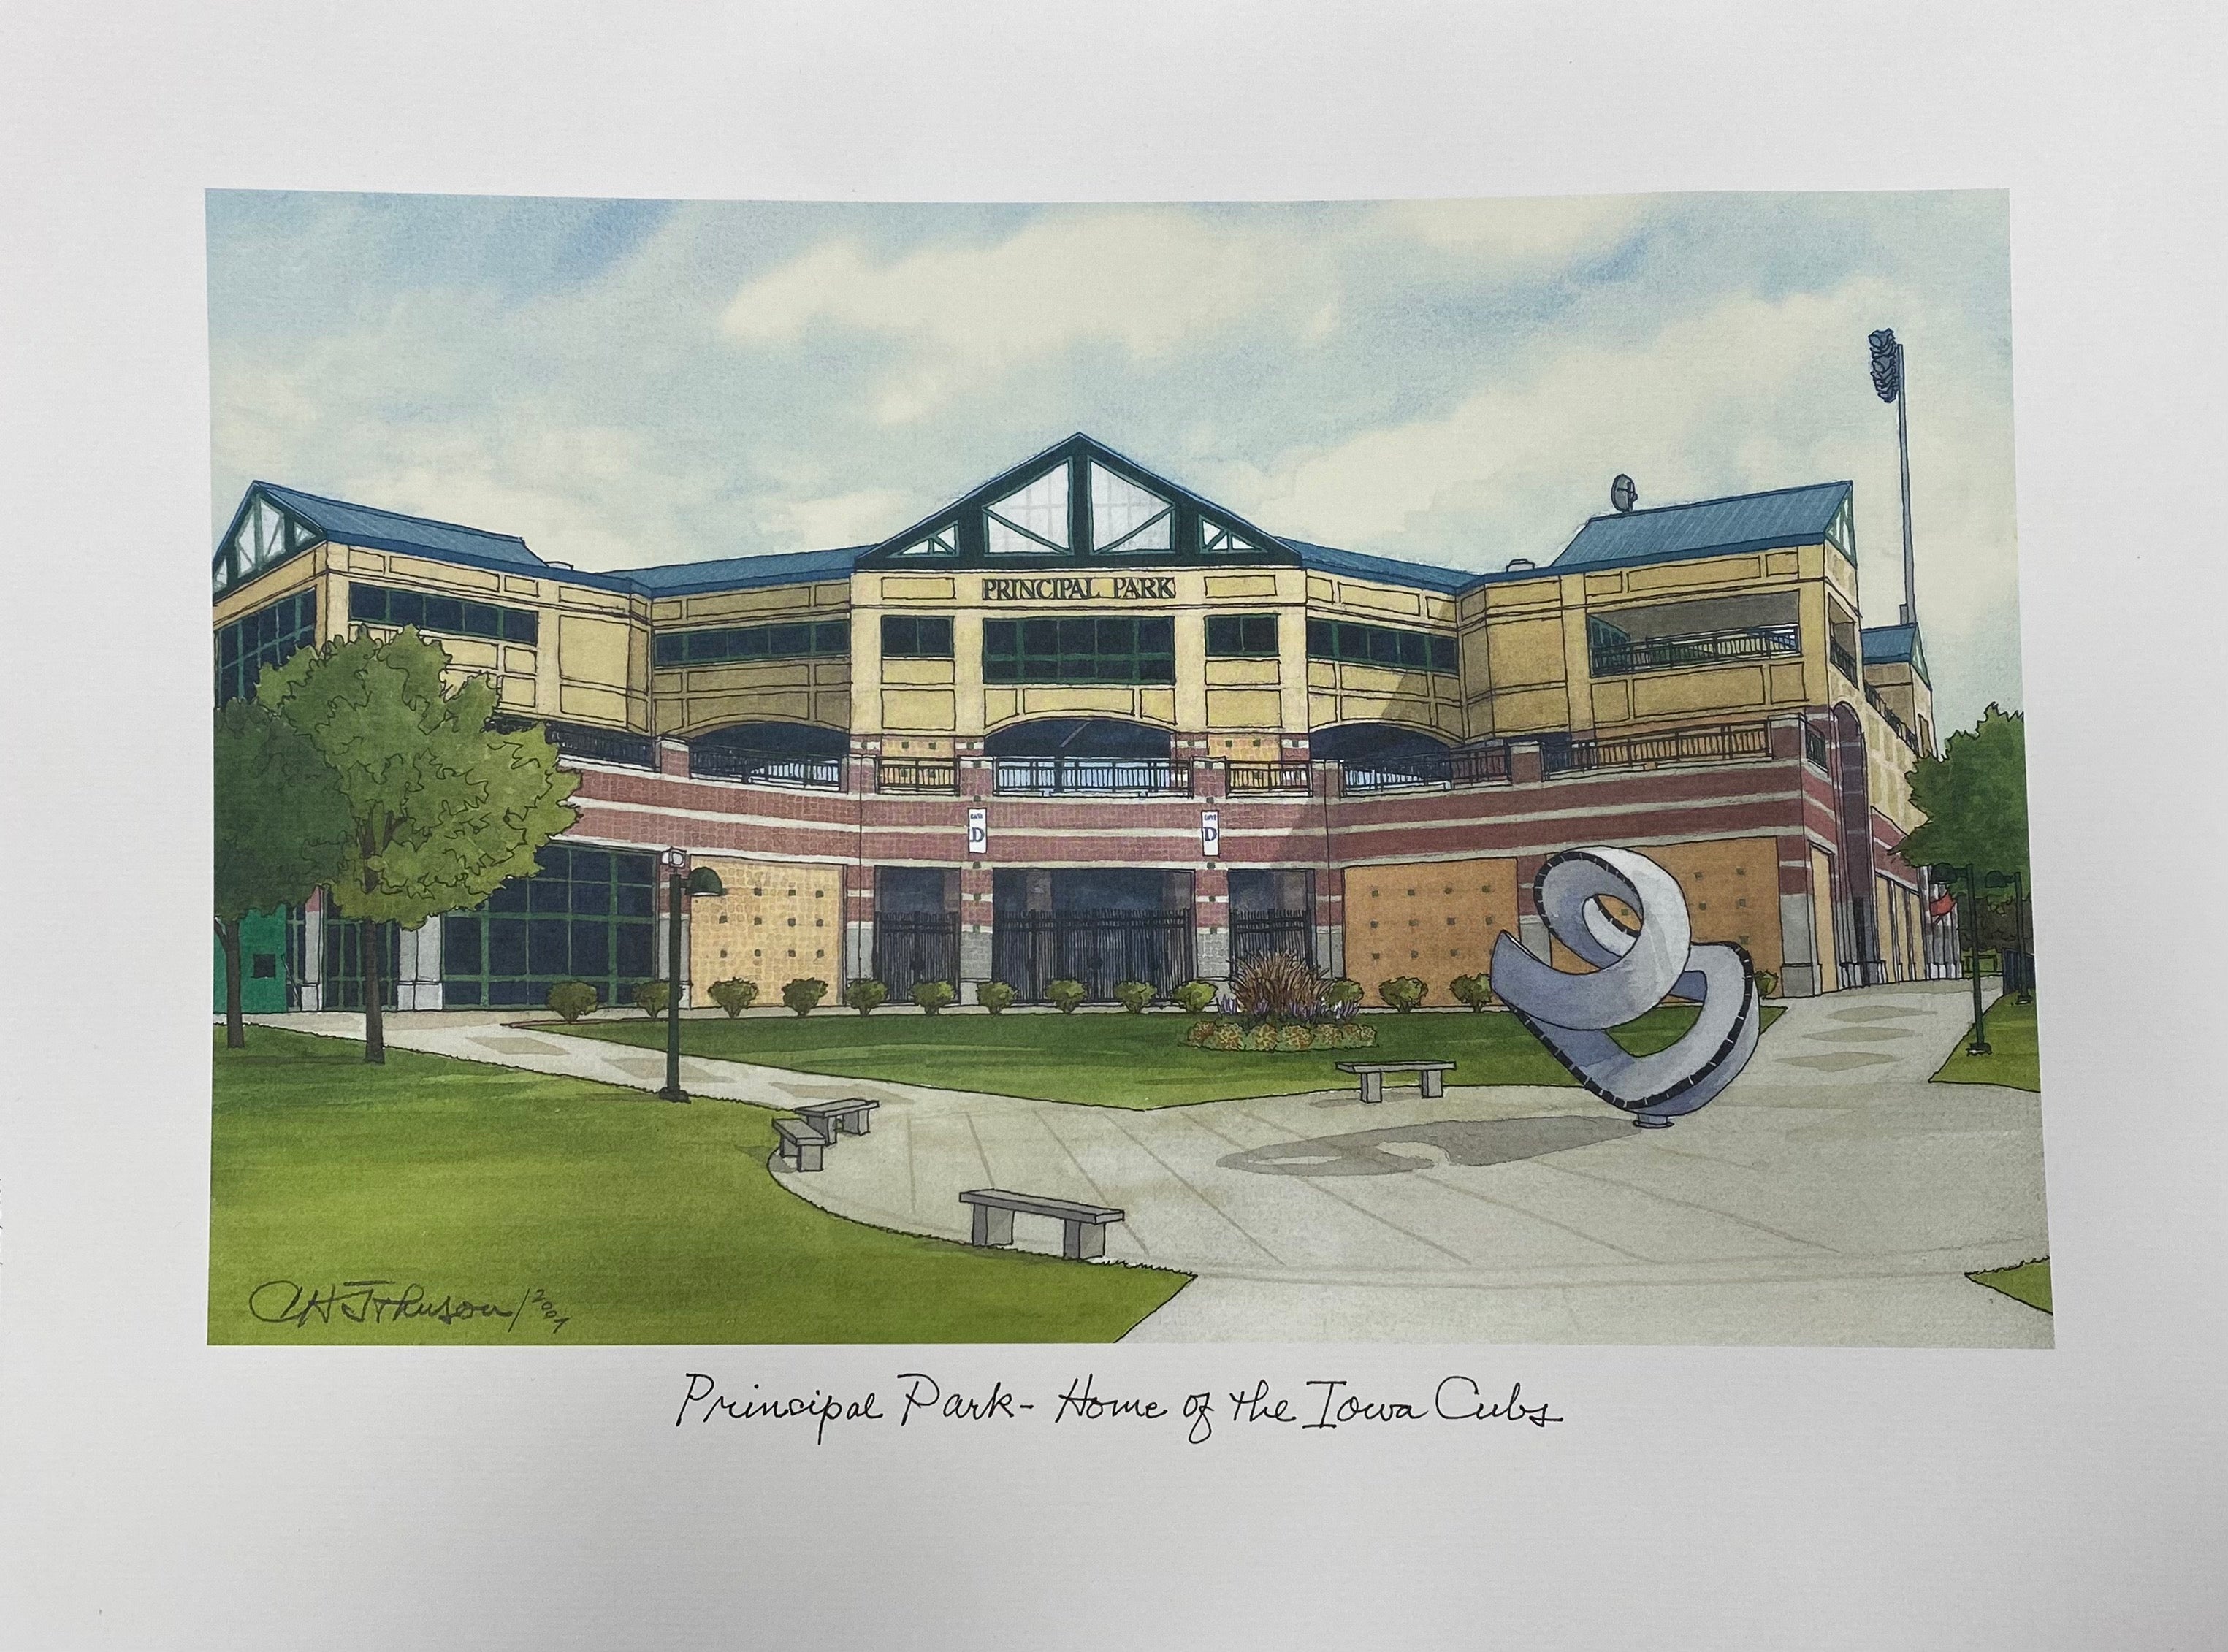 Photos: Principal Park, home of Iowa Cubs in downtown Des Moines